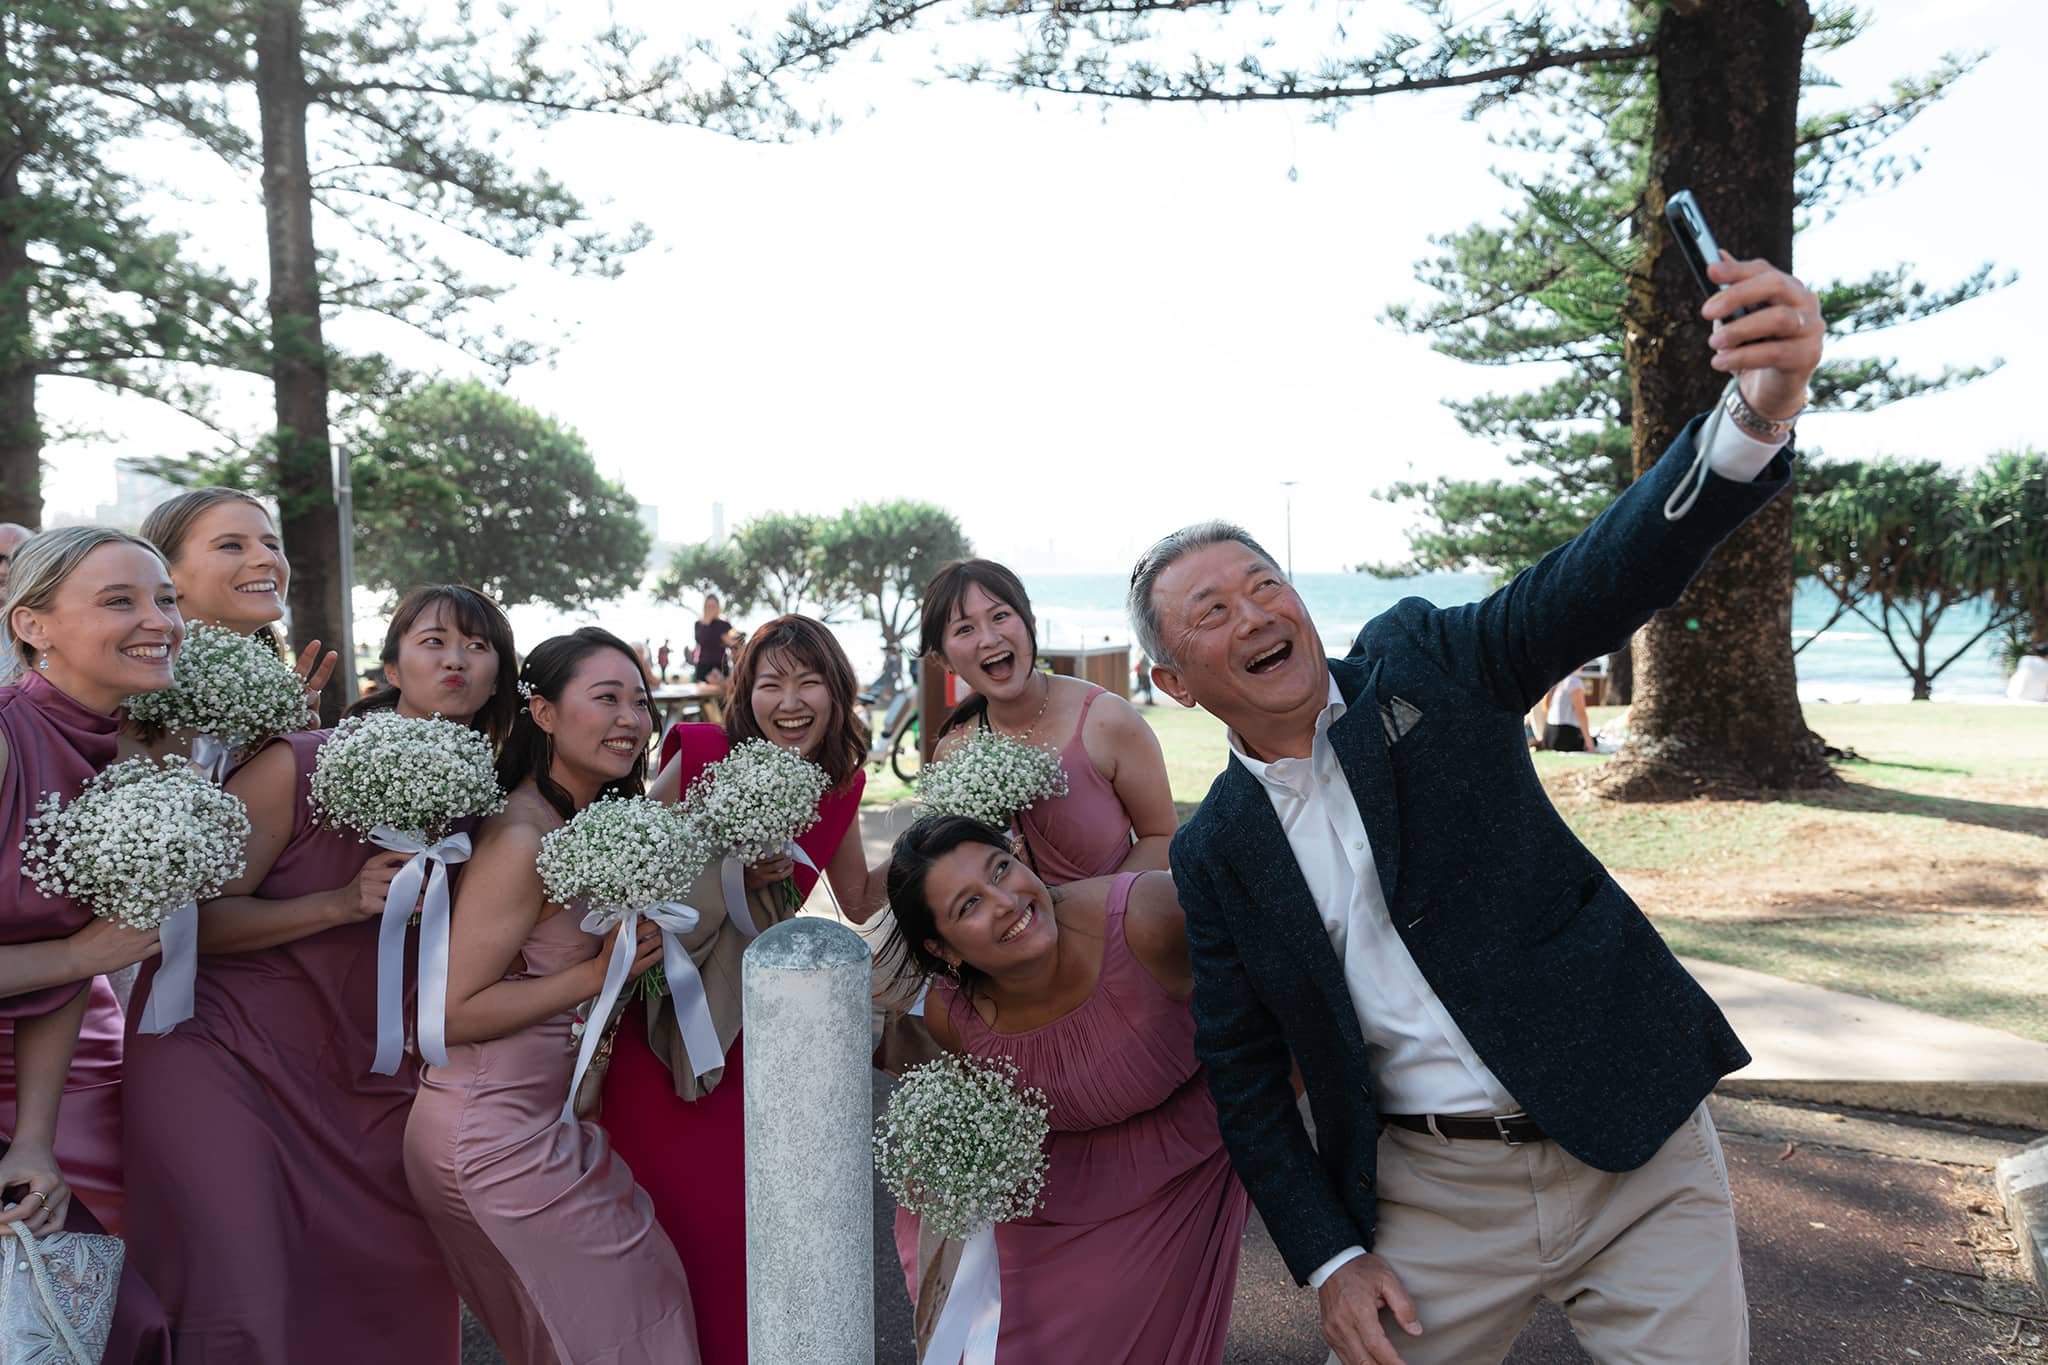 Brides dad taking a selfie with the bridal party on arrival.